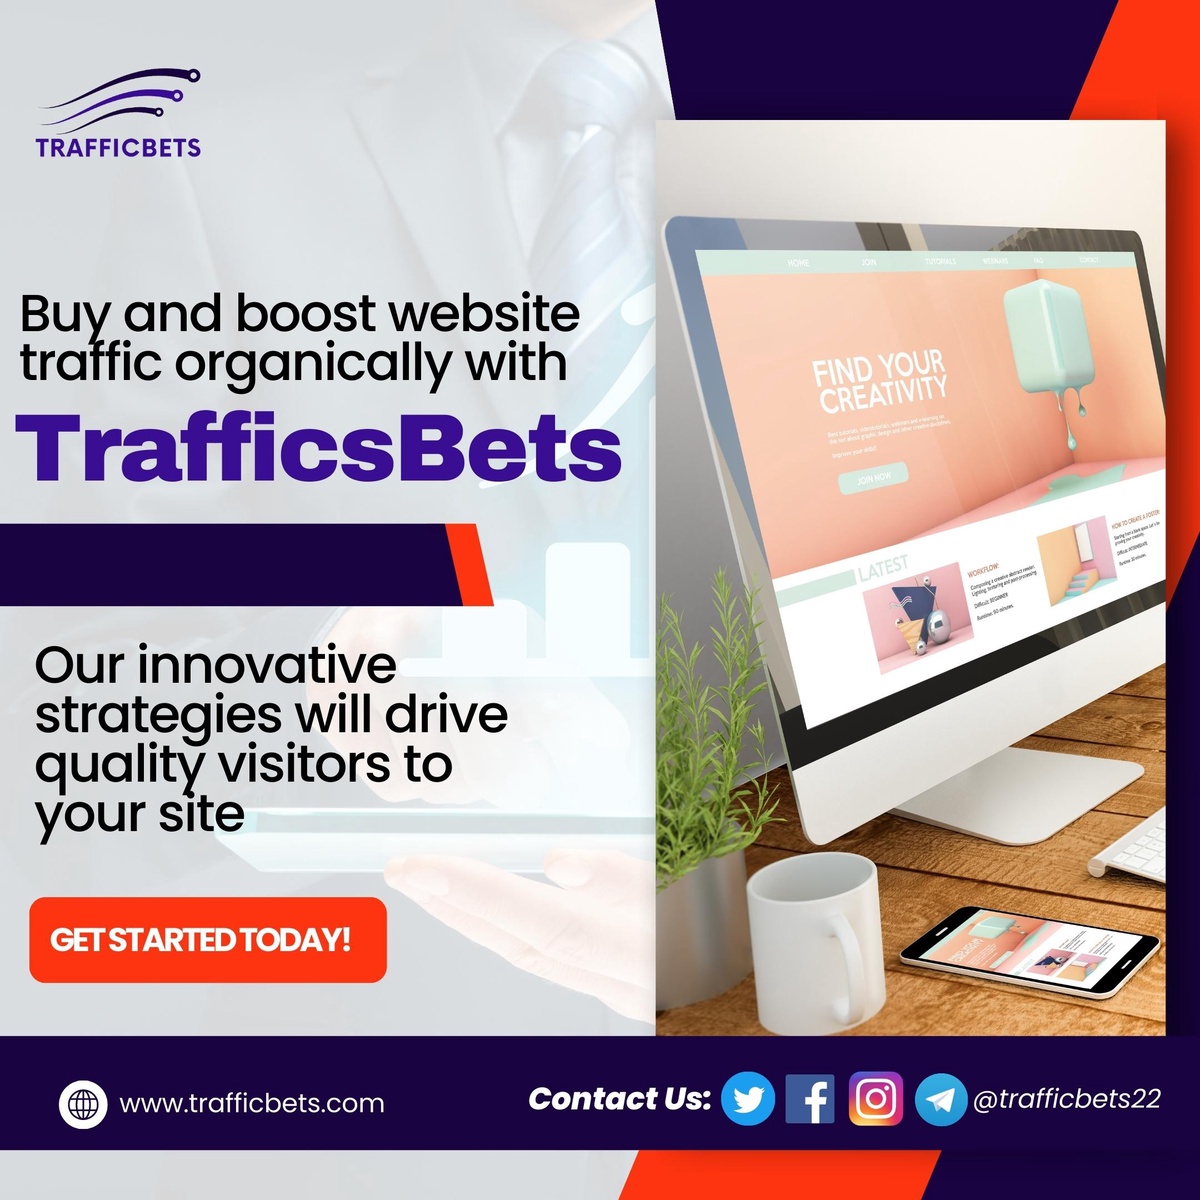 Welcome to TrafficBets, discover new ways to promote your business